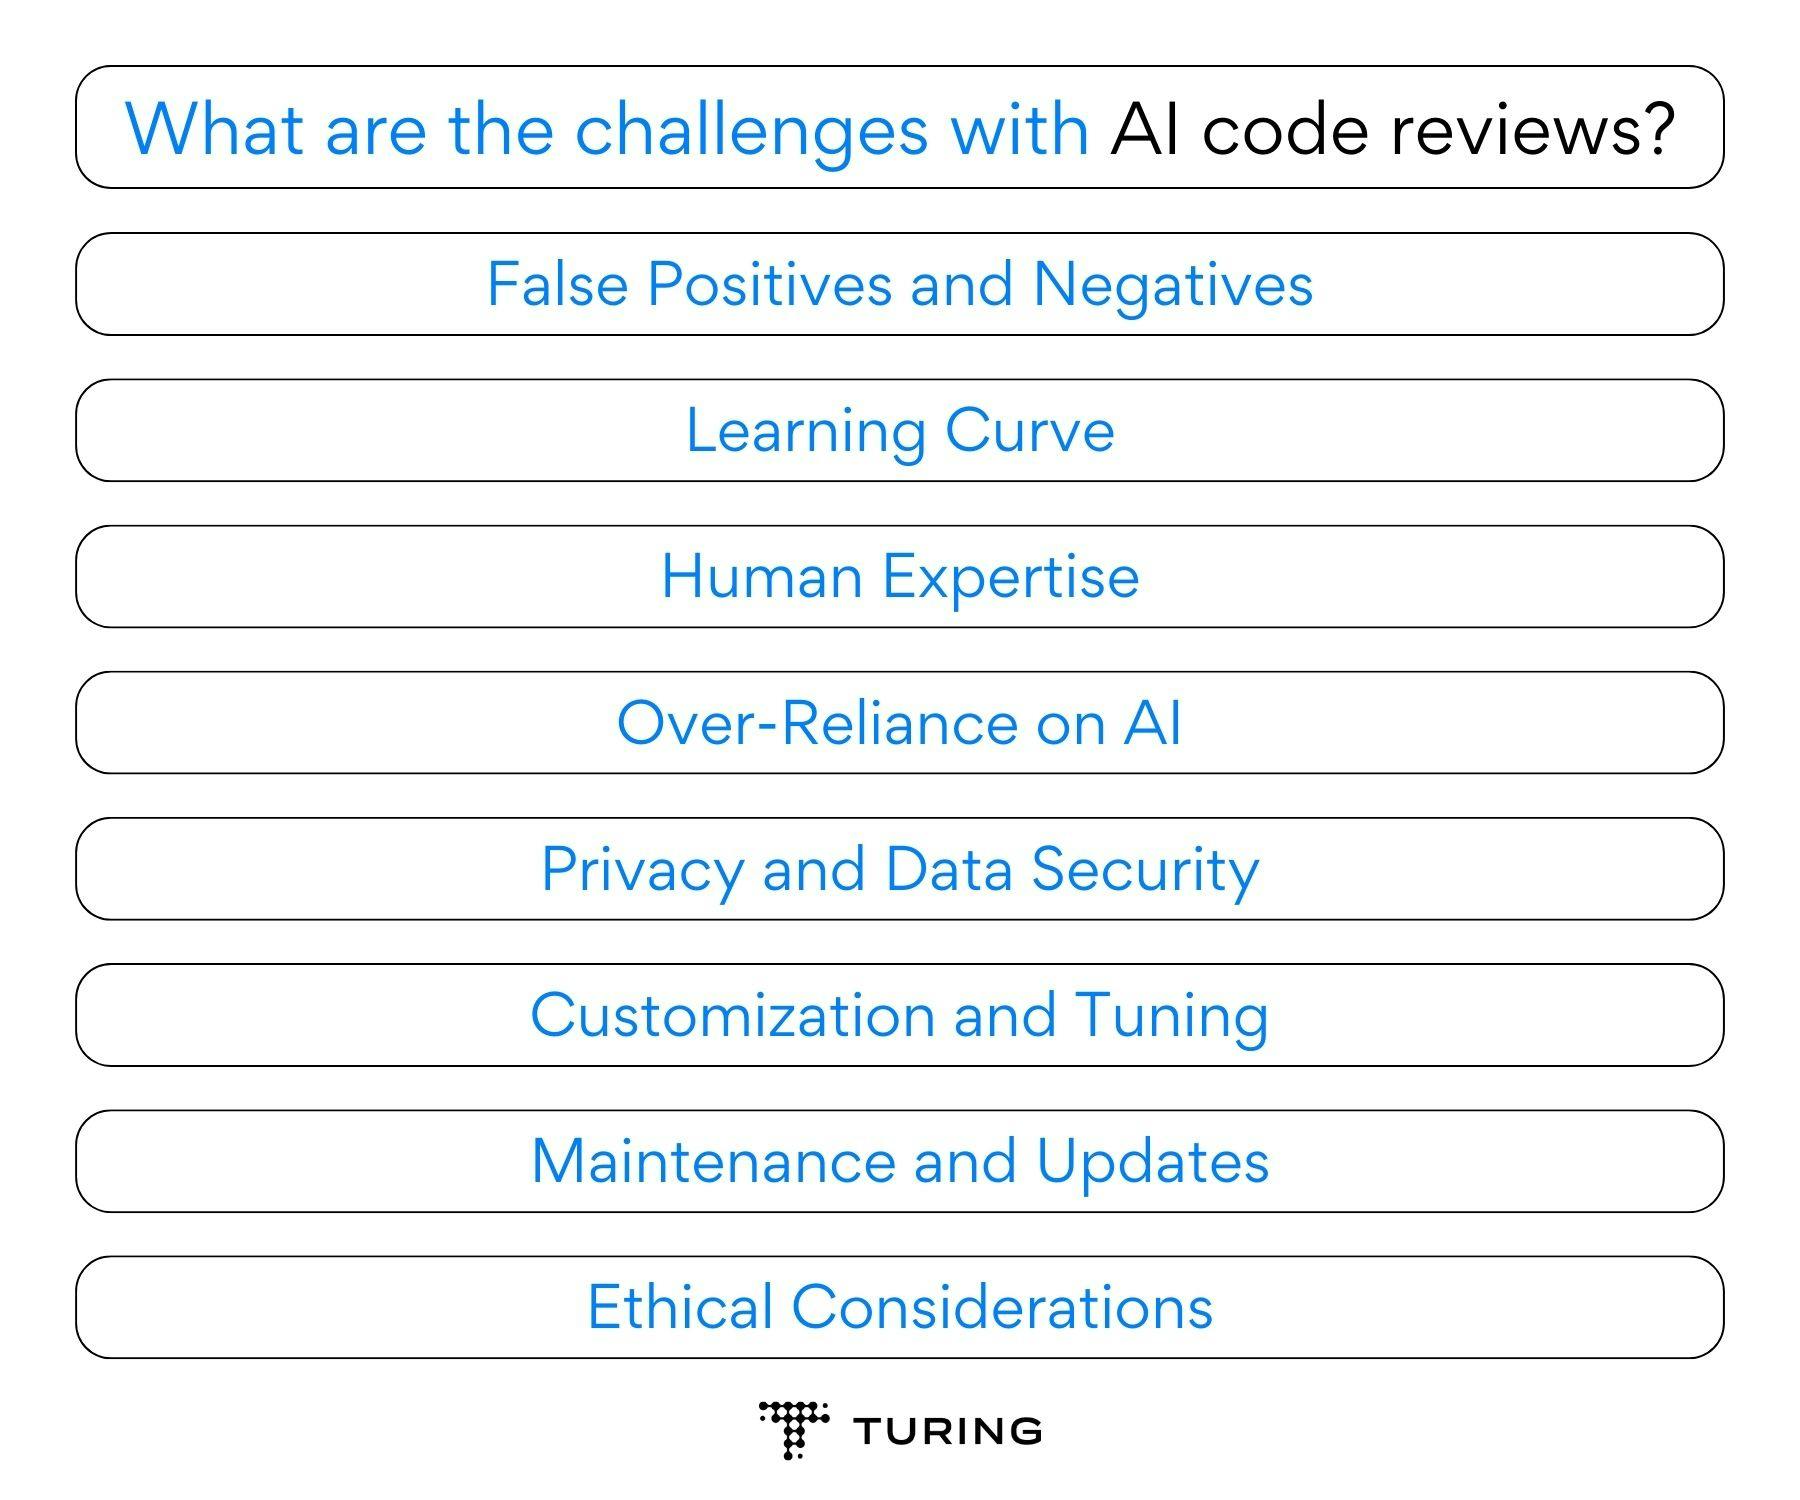 What are the challenges with AI code reviews?